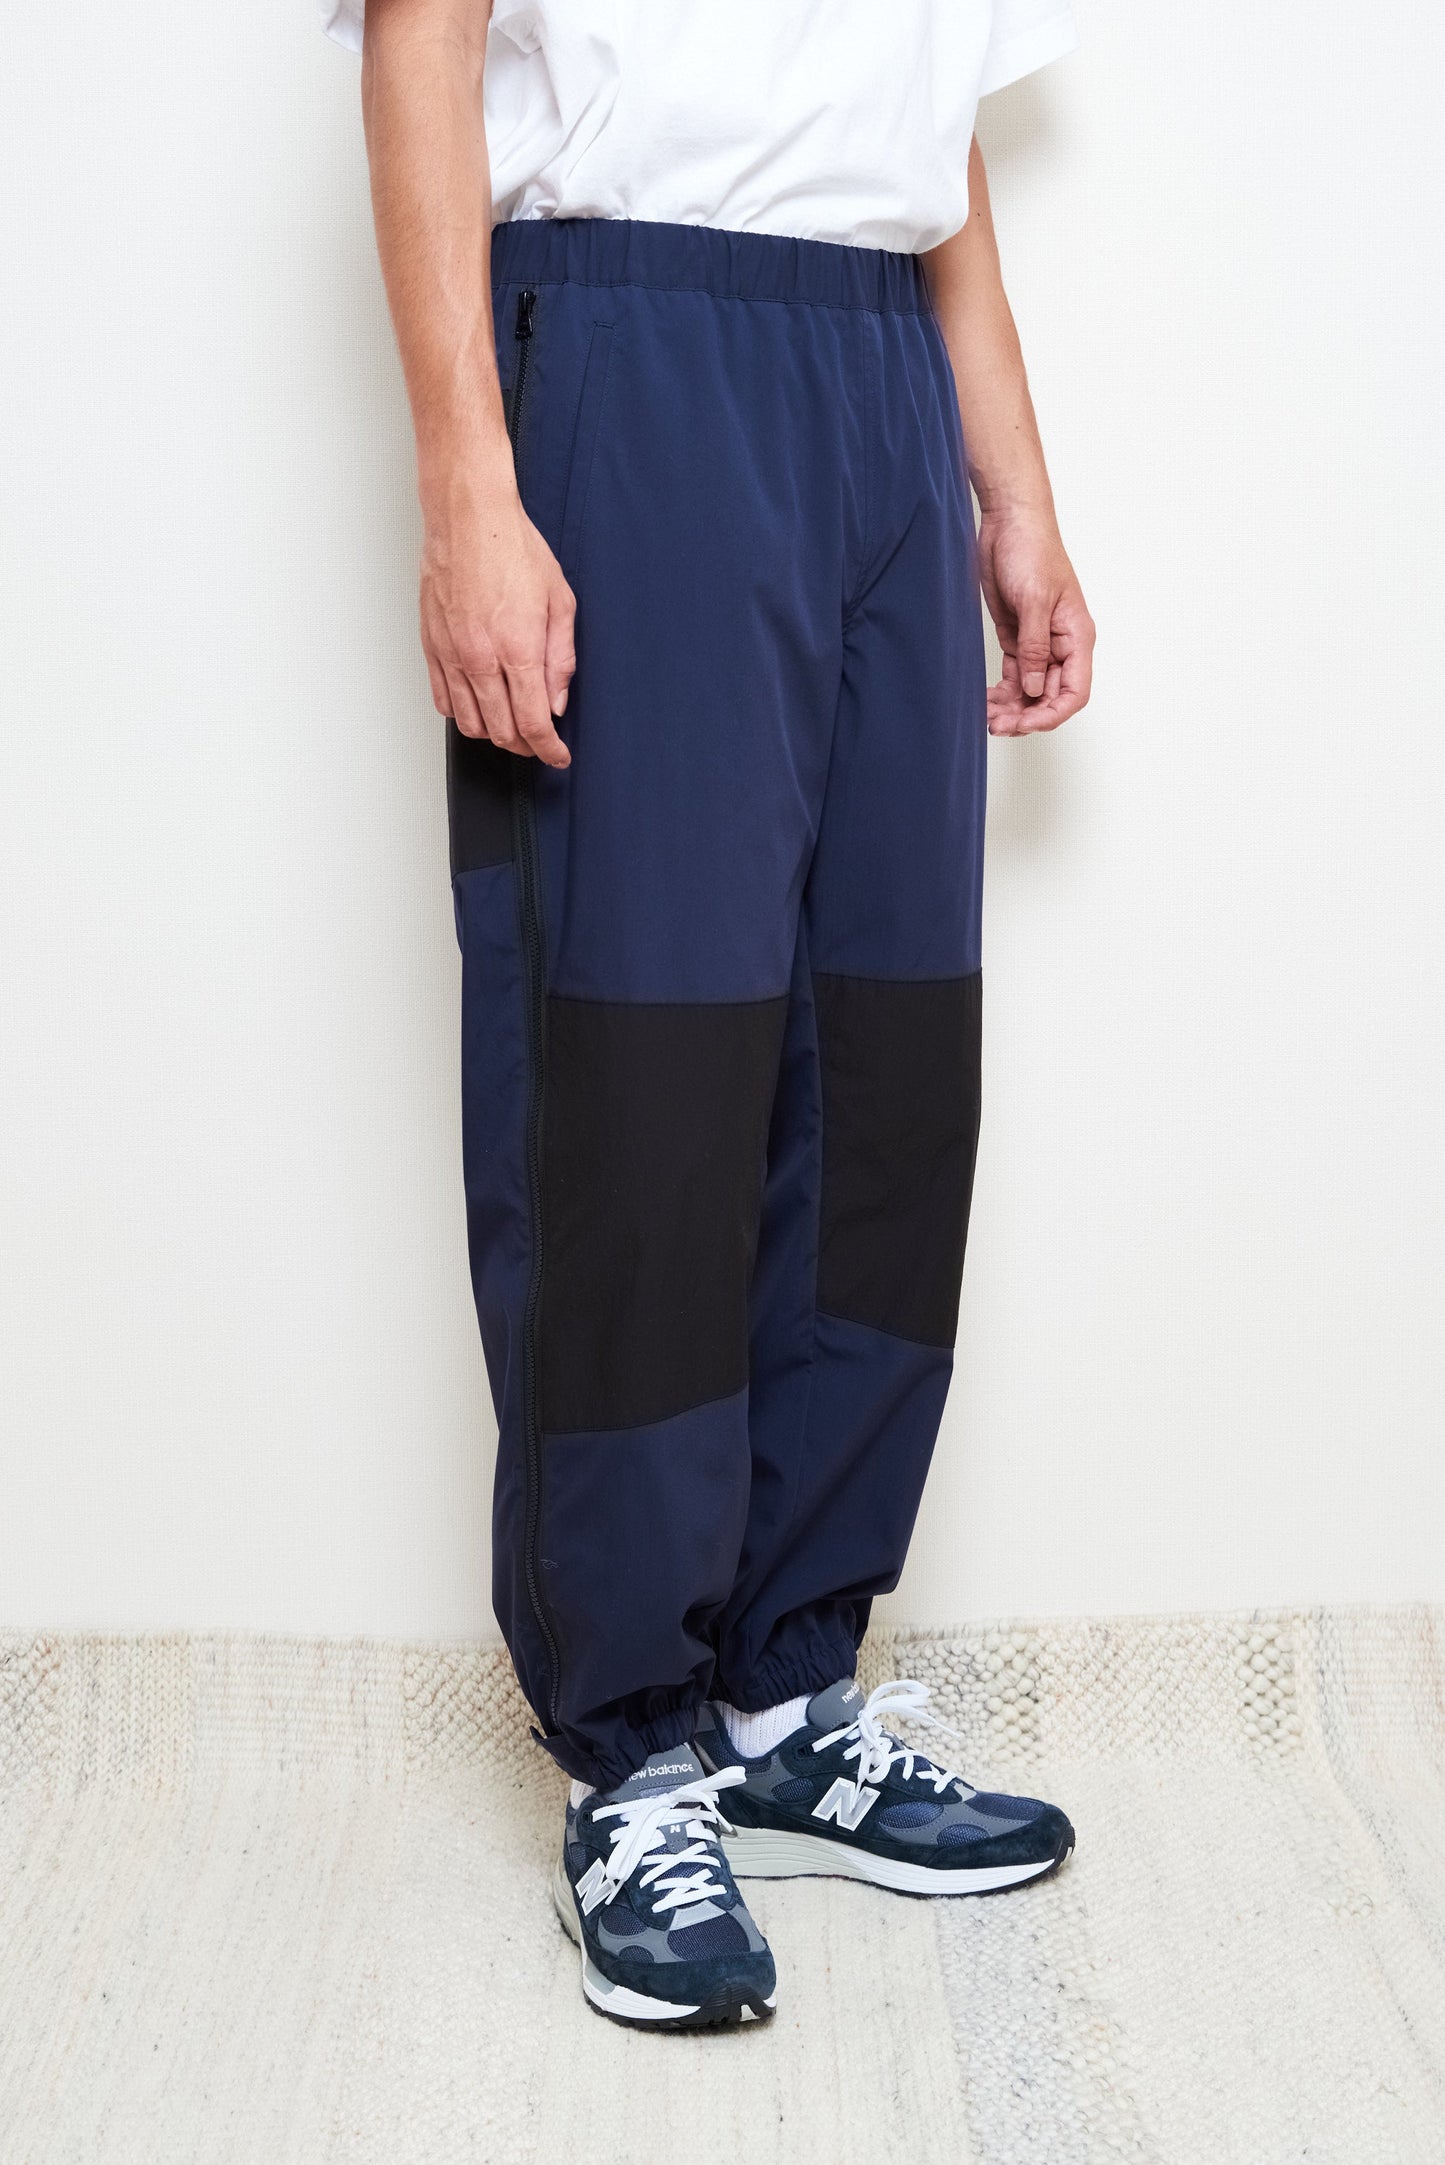 THE HOLY MOUNTAIN VENTILATION PANTS is-ness online shop 6